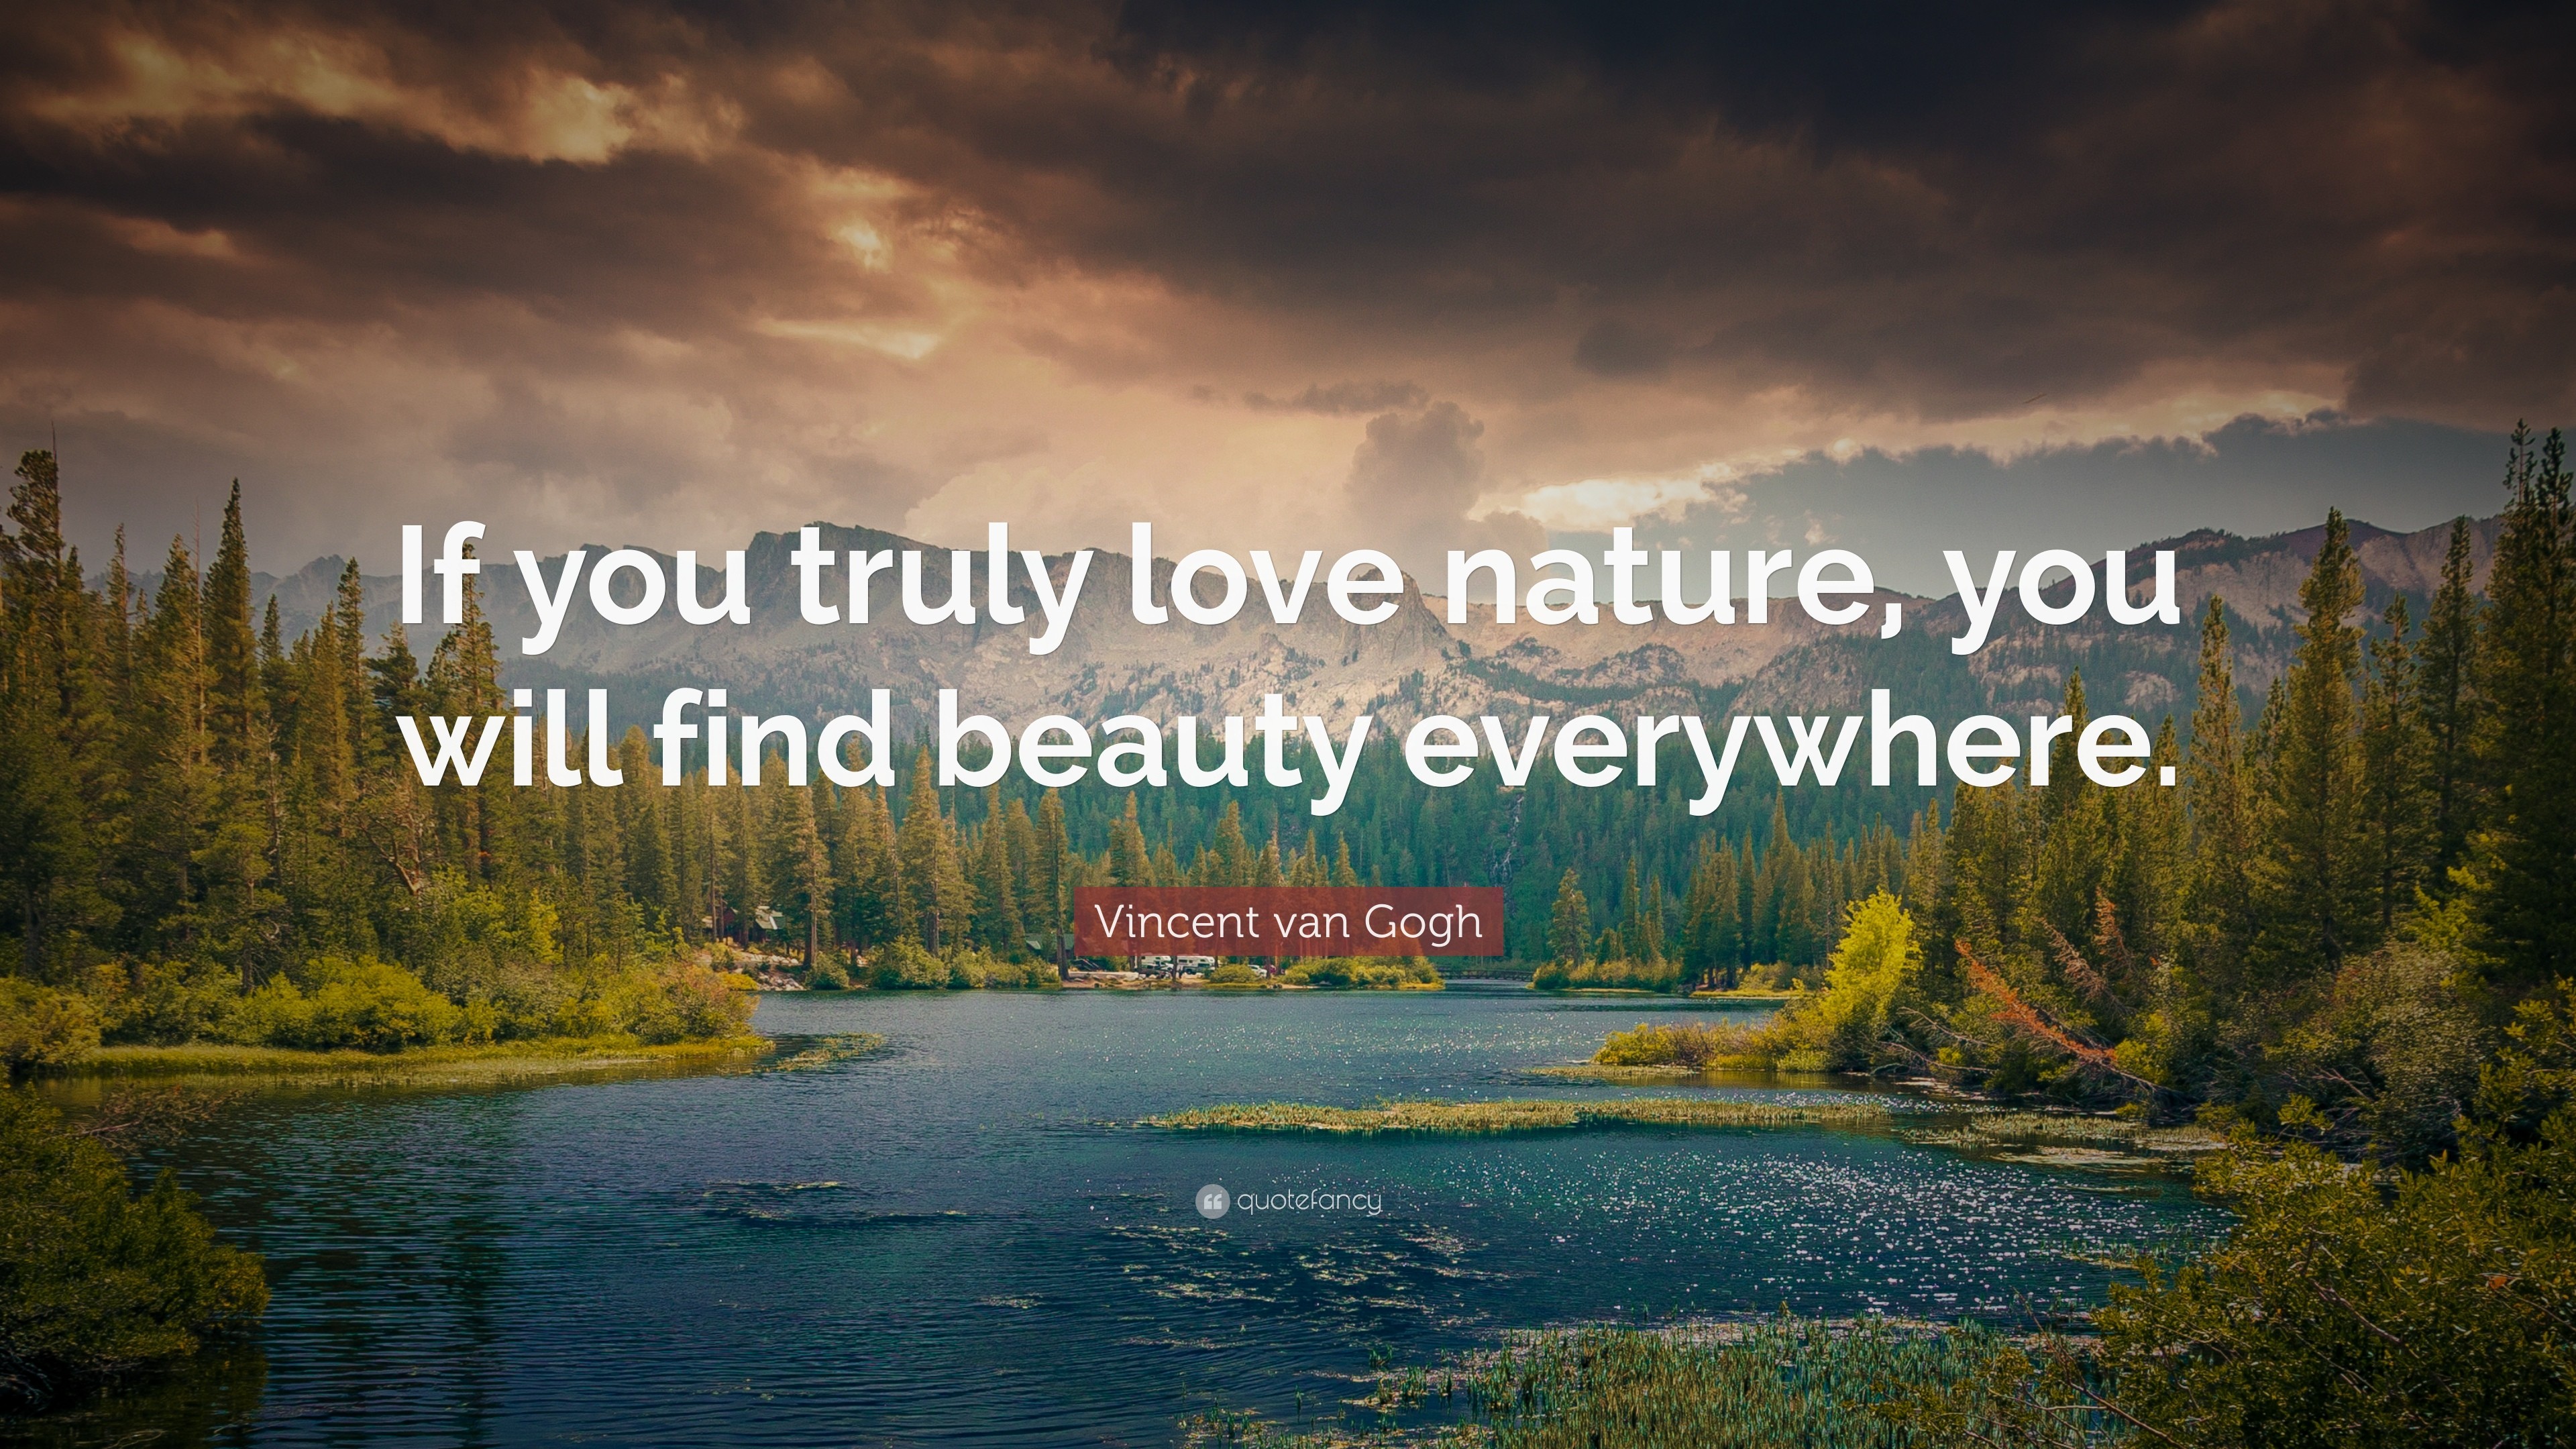 Nature Wallpaper with Quotes (61+ images)